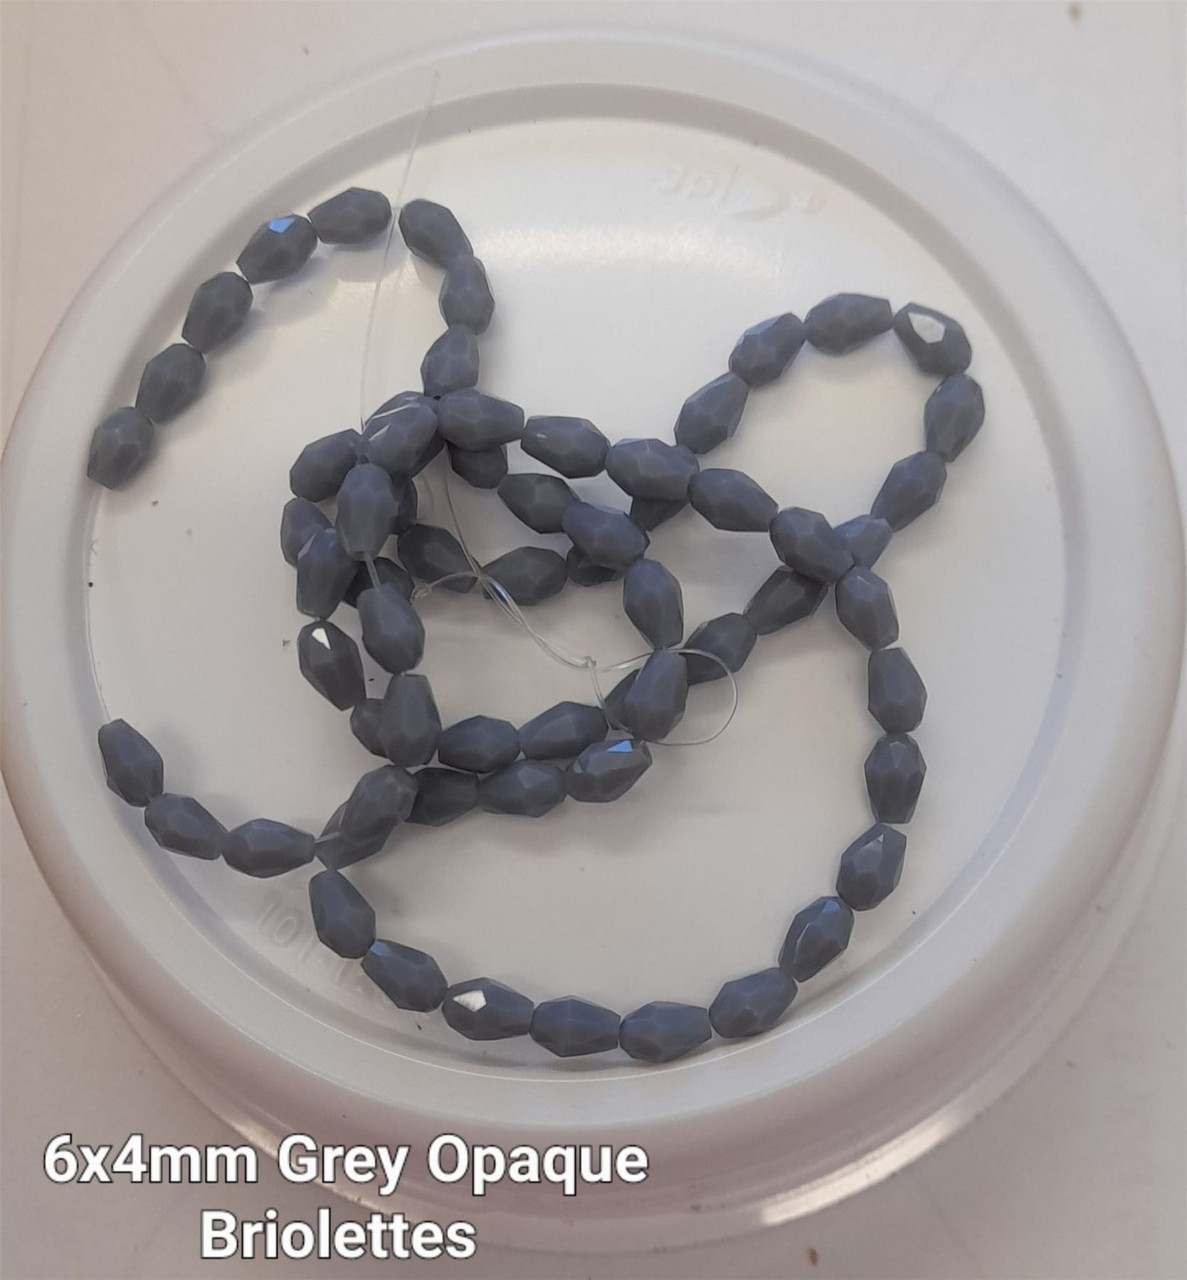 Strand of faceted drop glass beads (briolettes) - approx 6x4mm, Grey Opaque, approx 72 beads